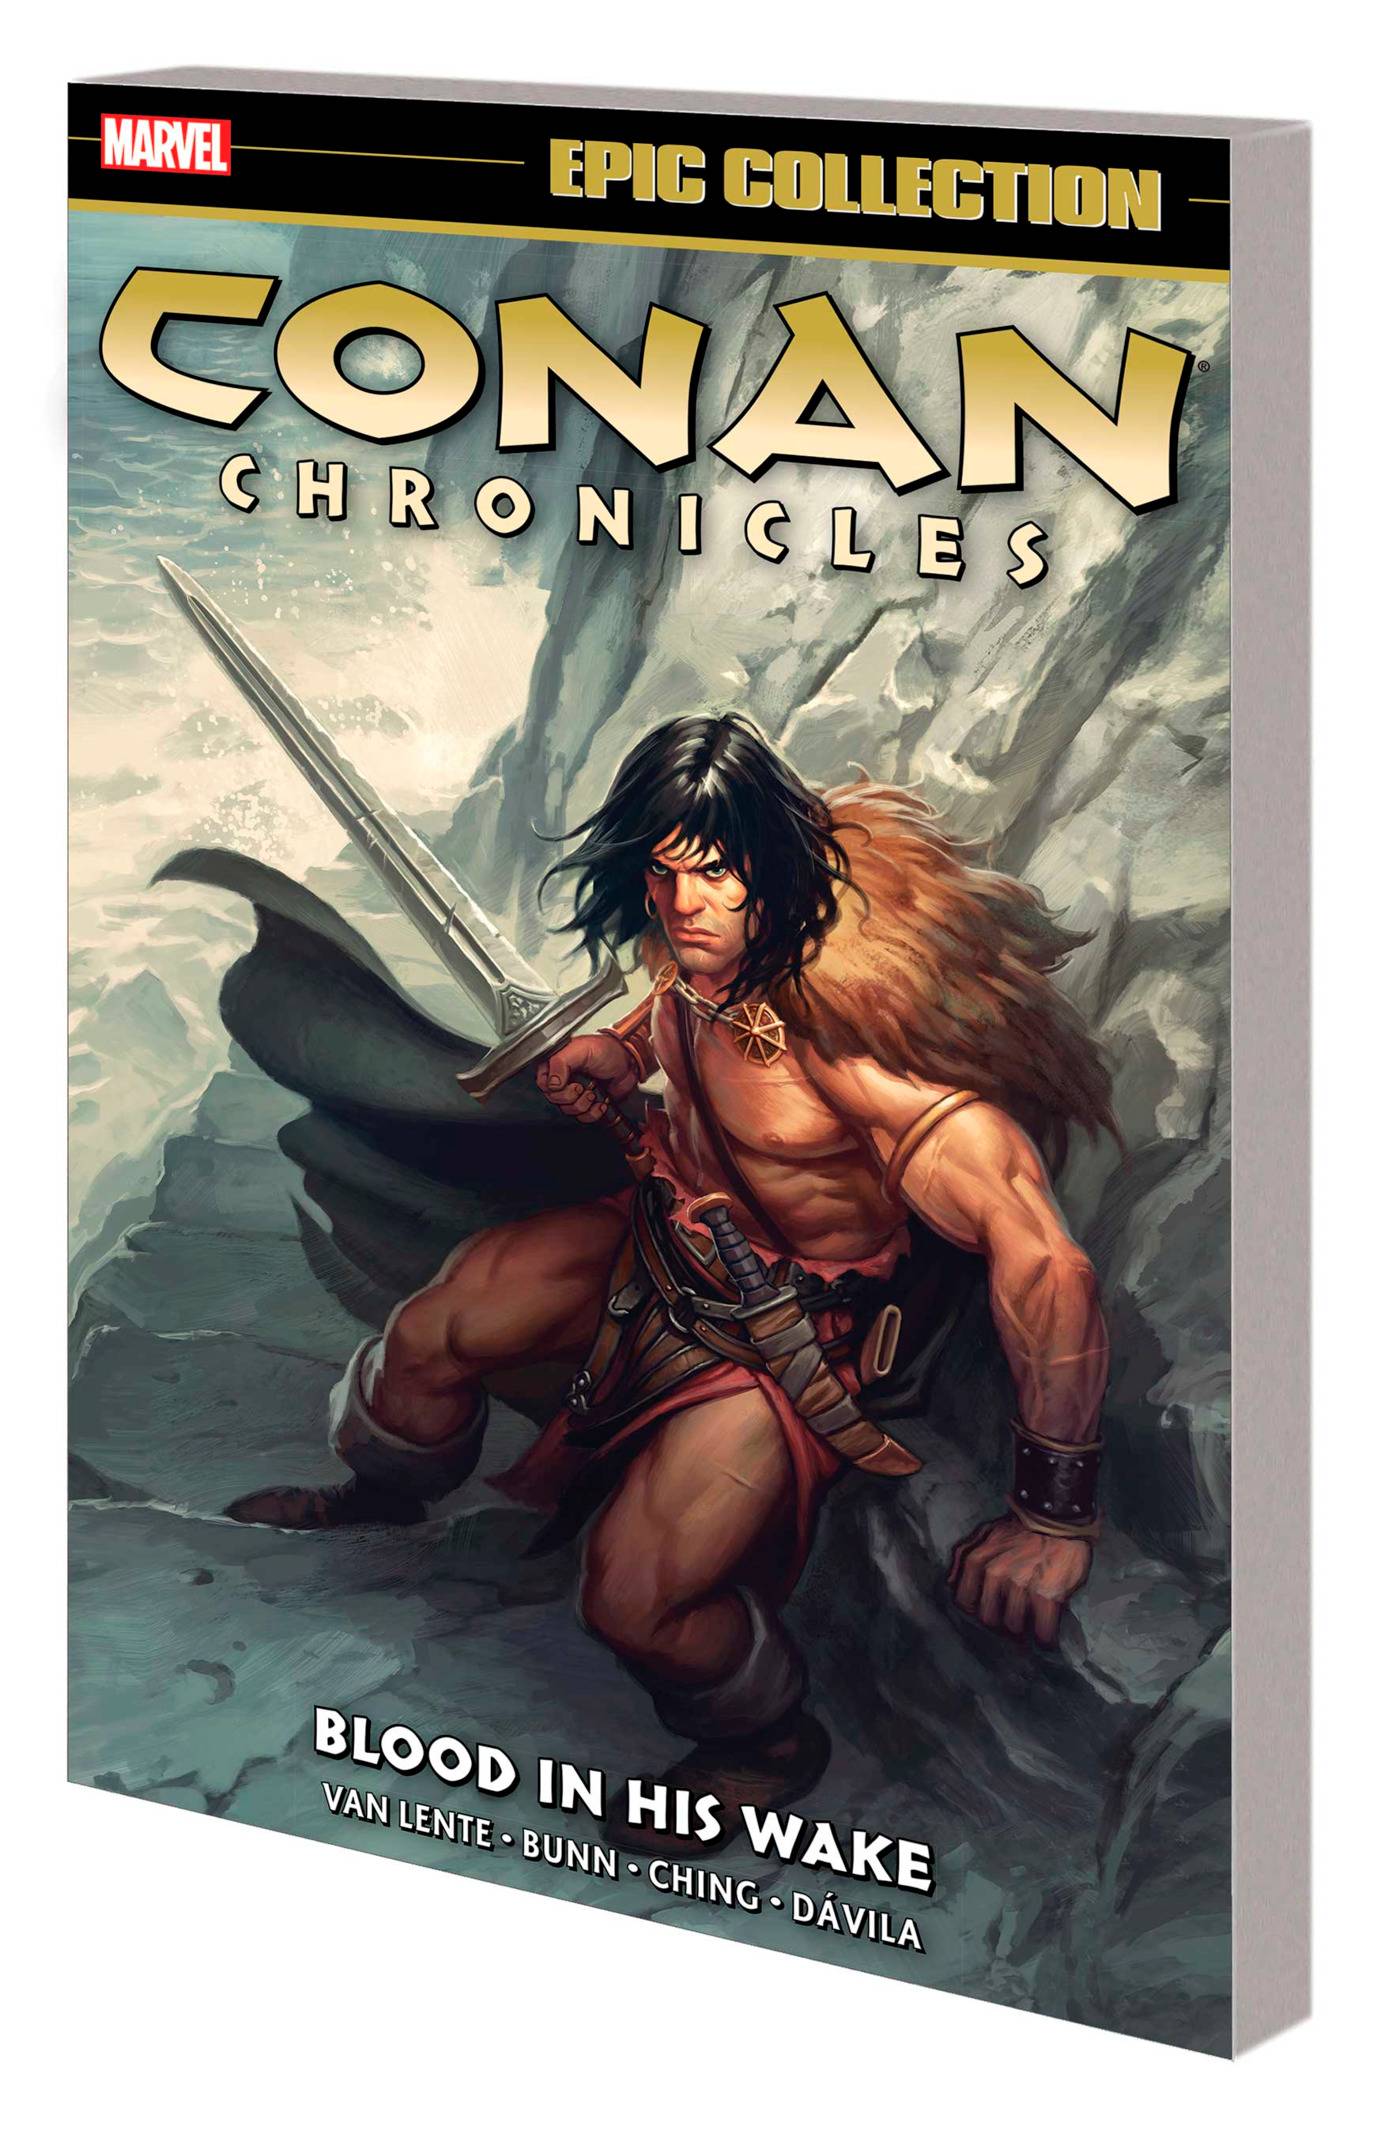 CONAN CHRONICLES EPIC COLLECTION TP 08 BLOOD IN HIS WAKE